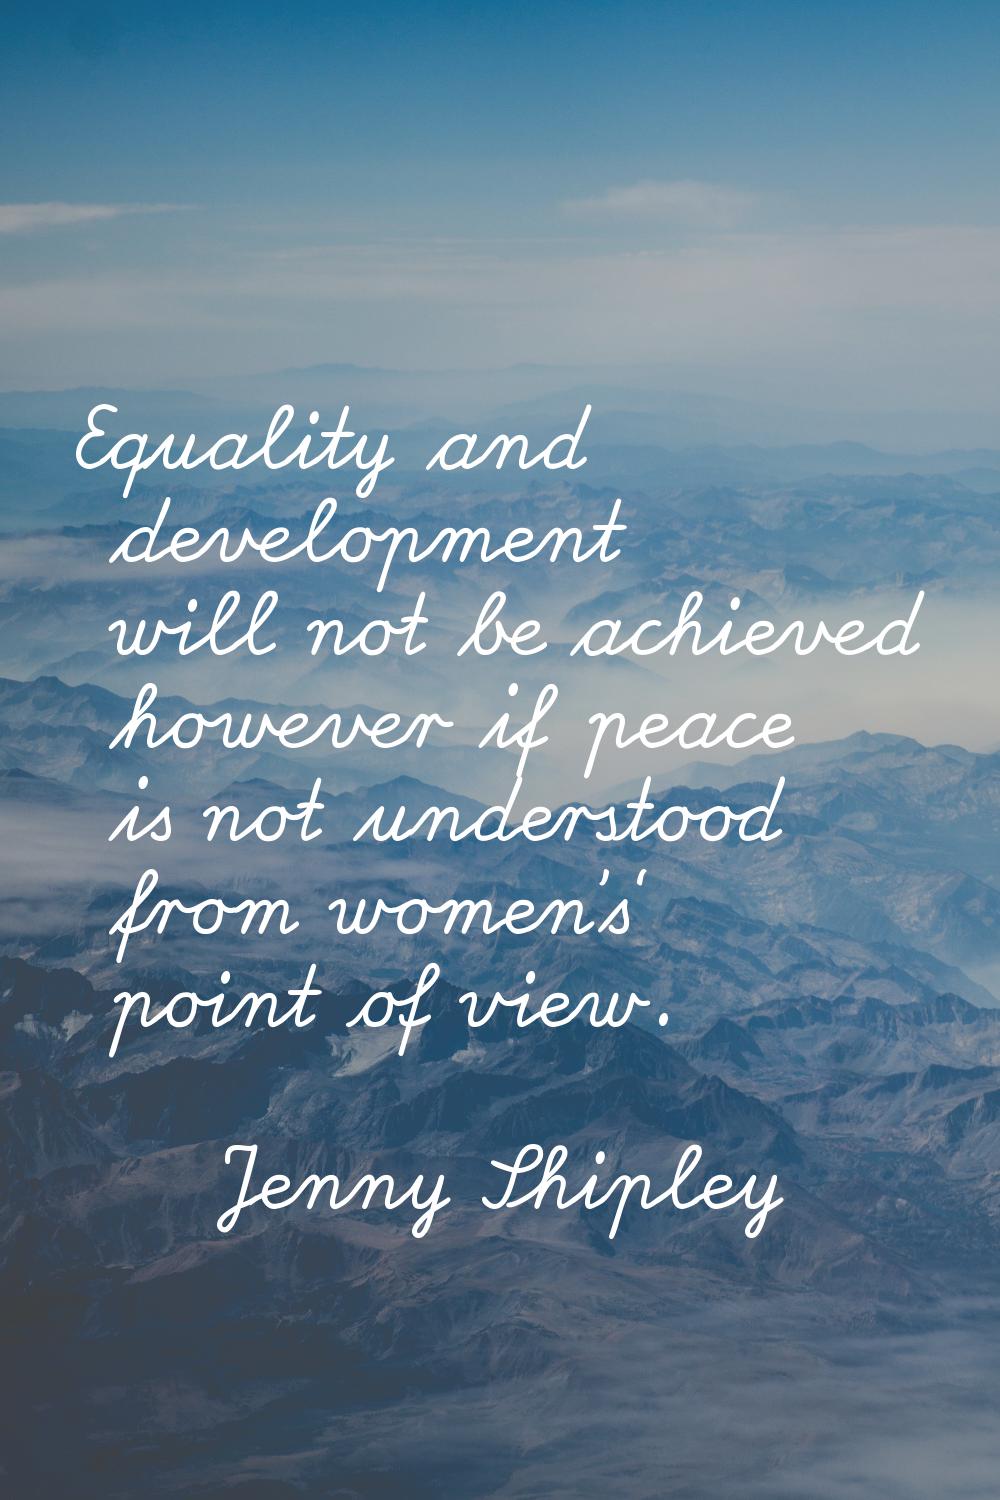 Equality and development will not be achieved however if peace is not understood from women's' poin